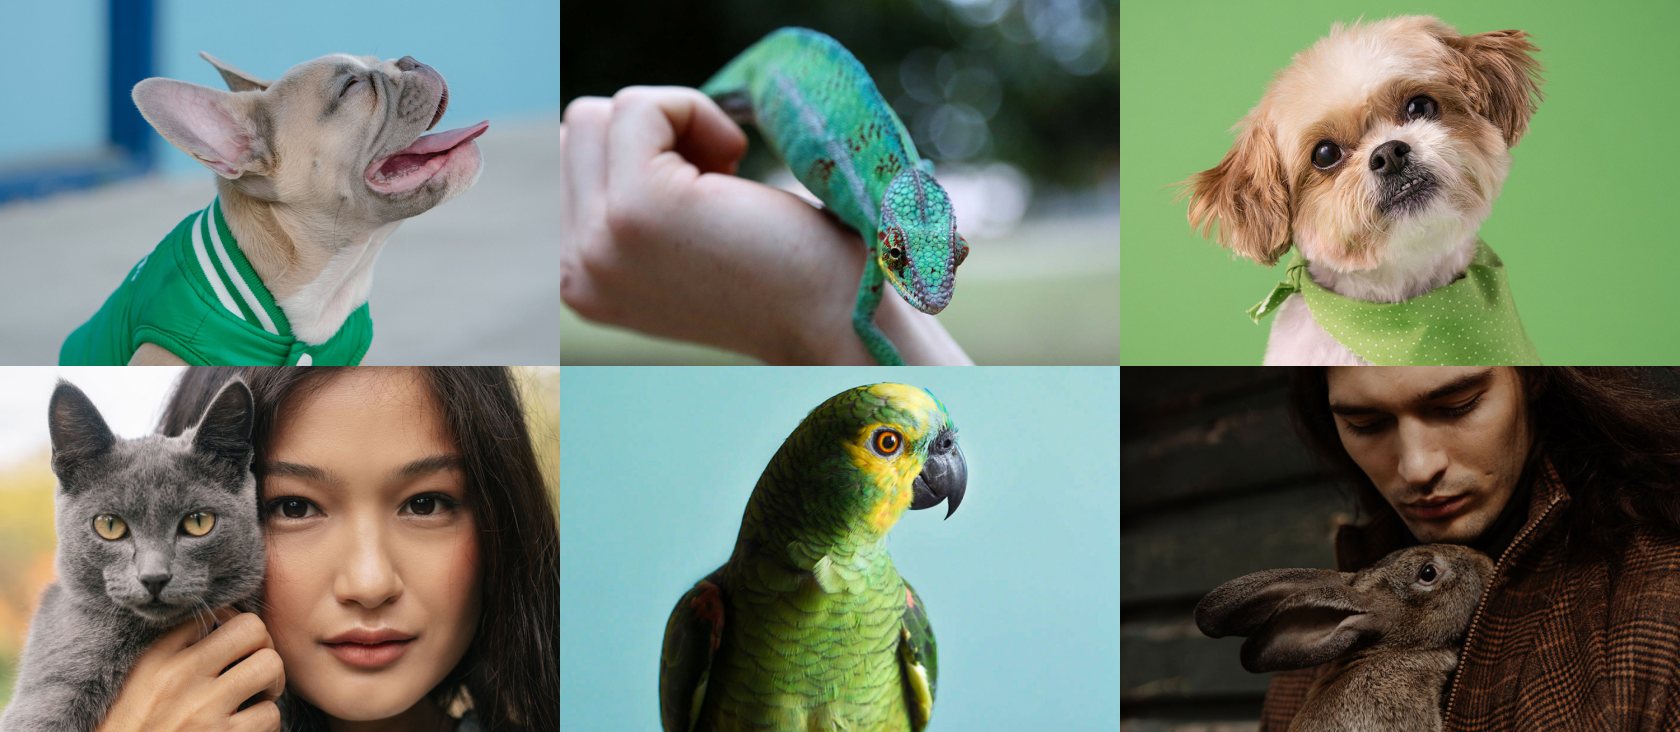 A collage of animals and people in various settings, showcasing the beauty of nature and human-animal interactions.